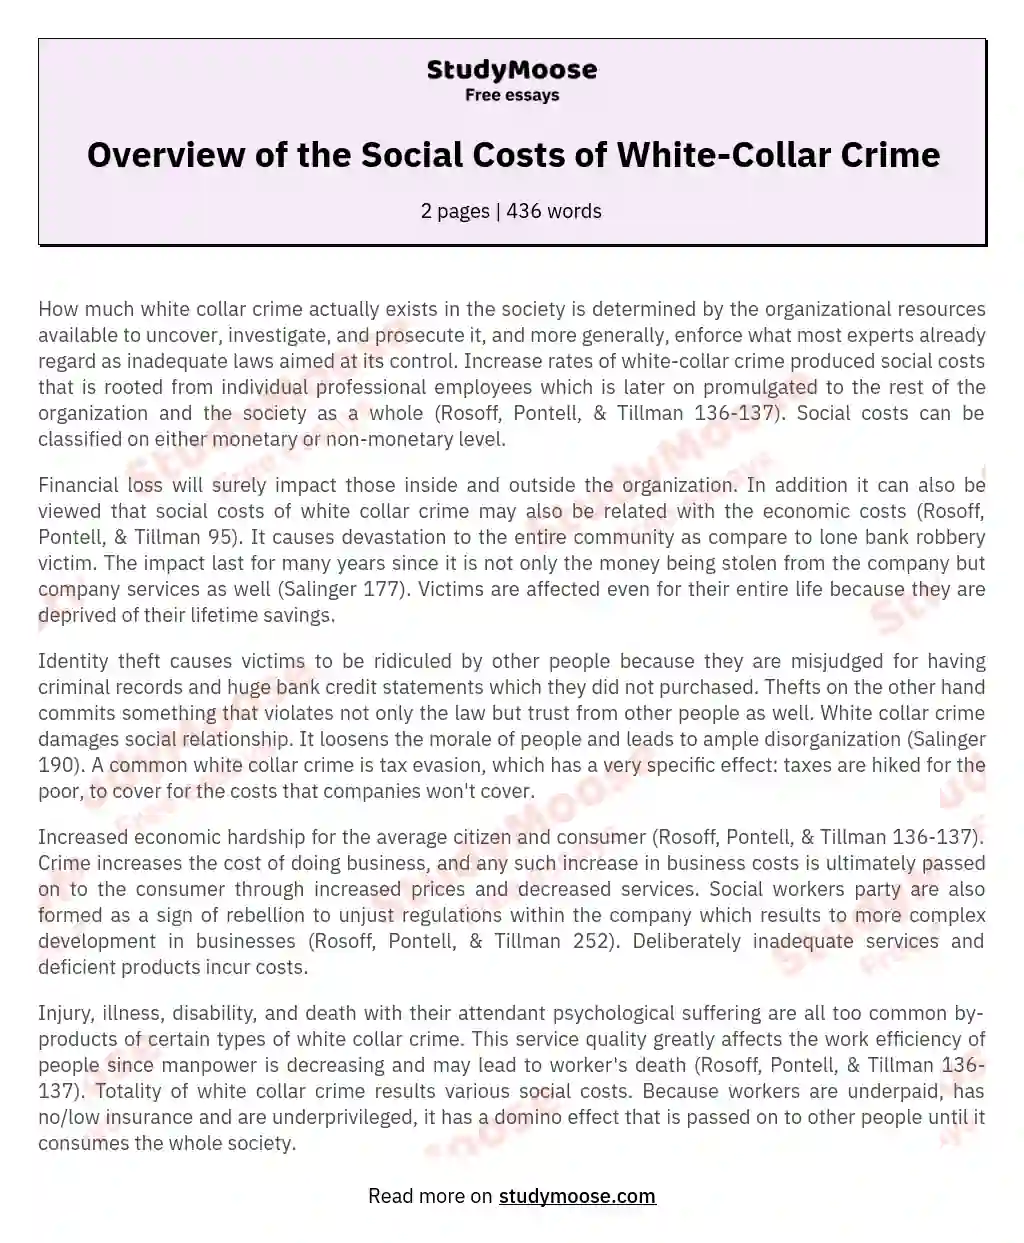 Overview of the Social Costs of White-Collar Crime essay